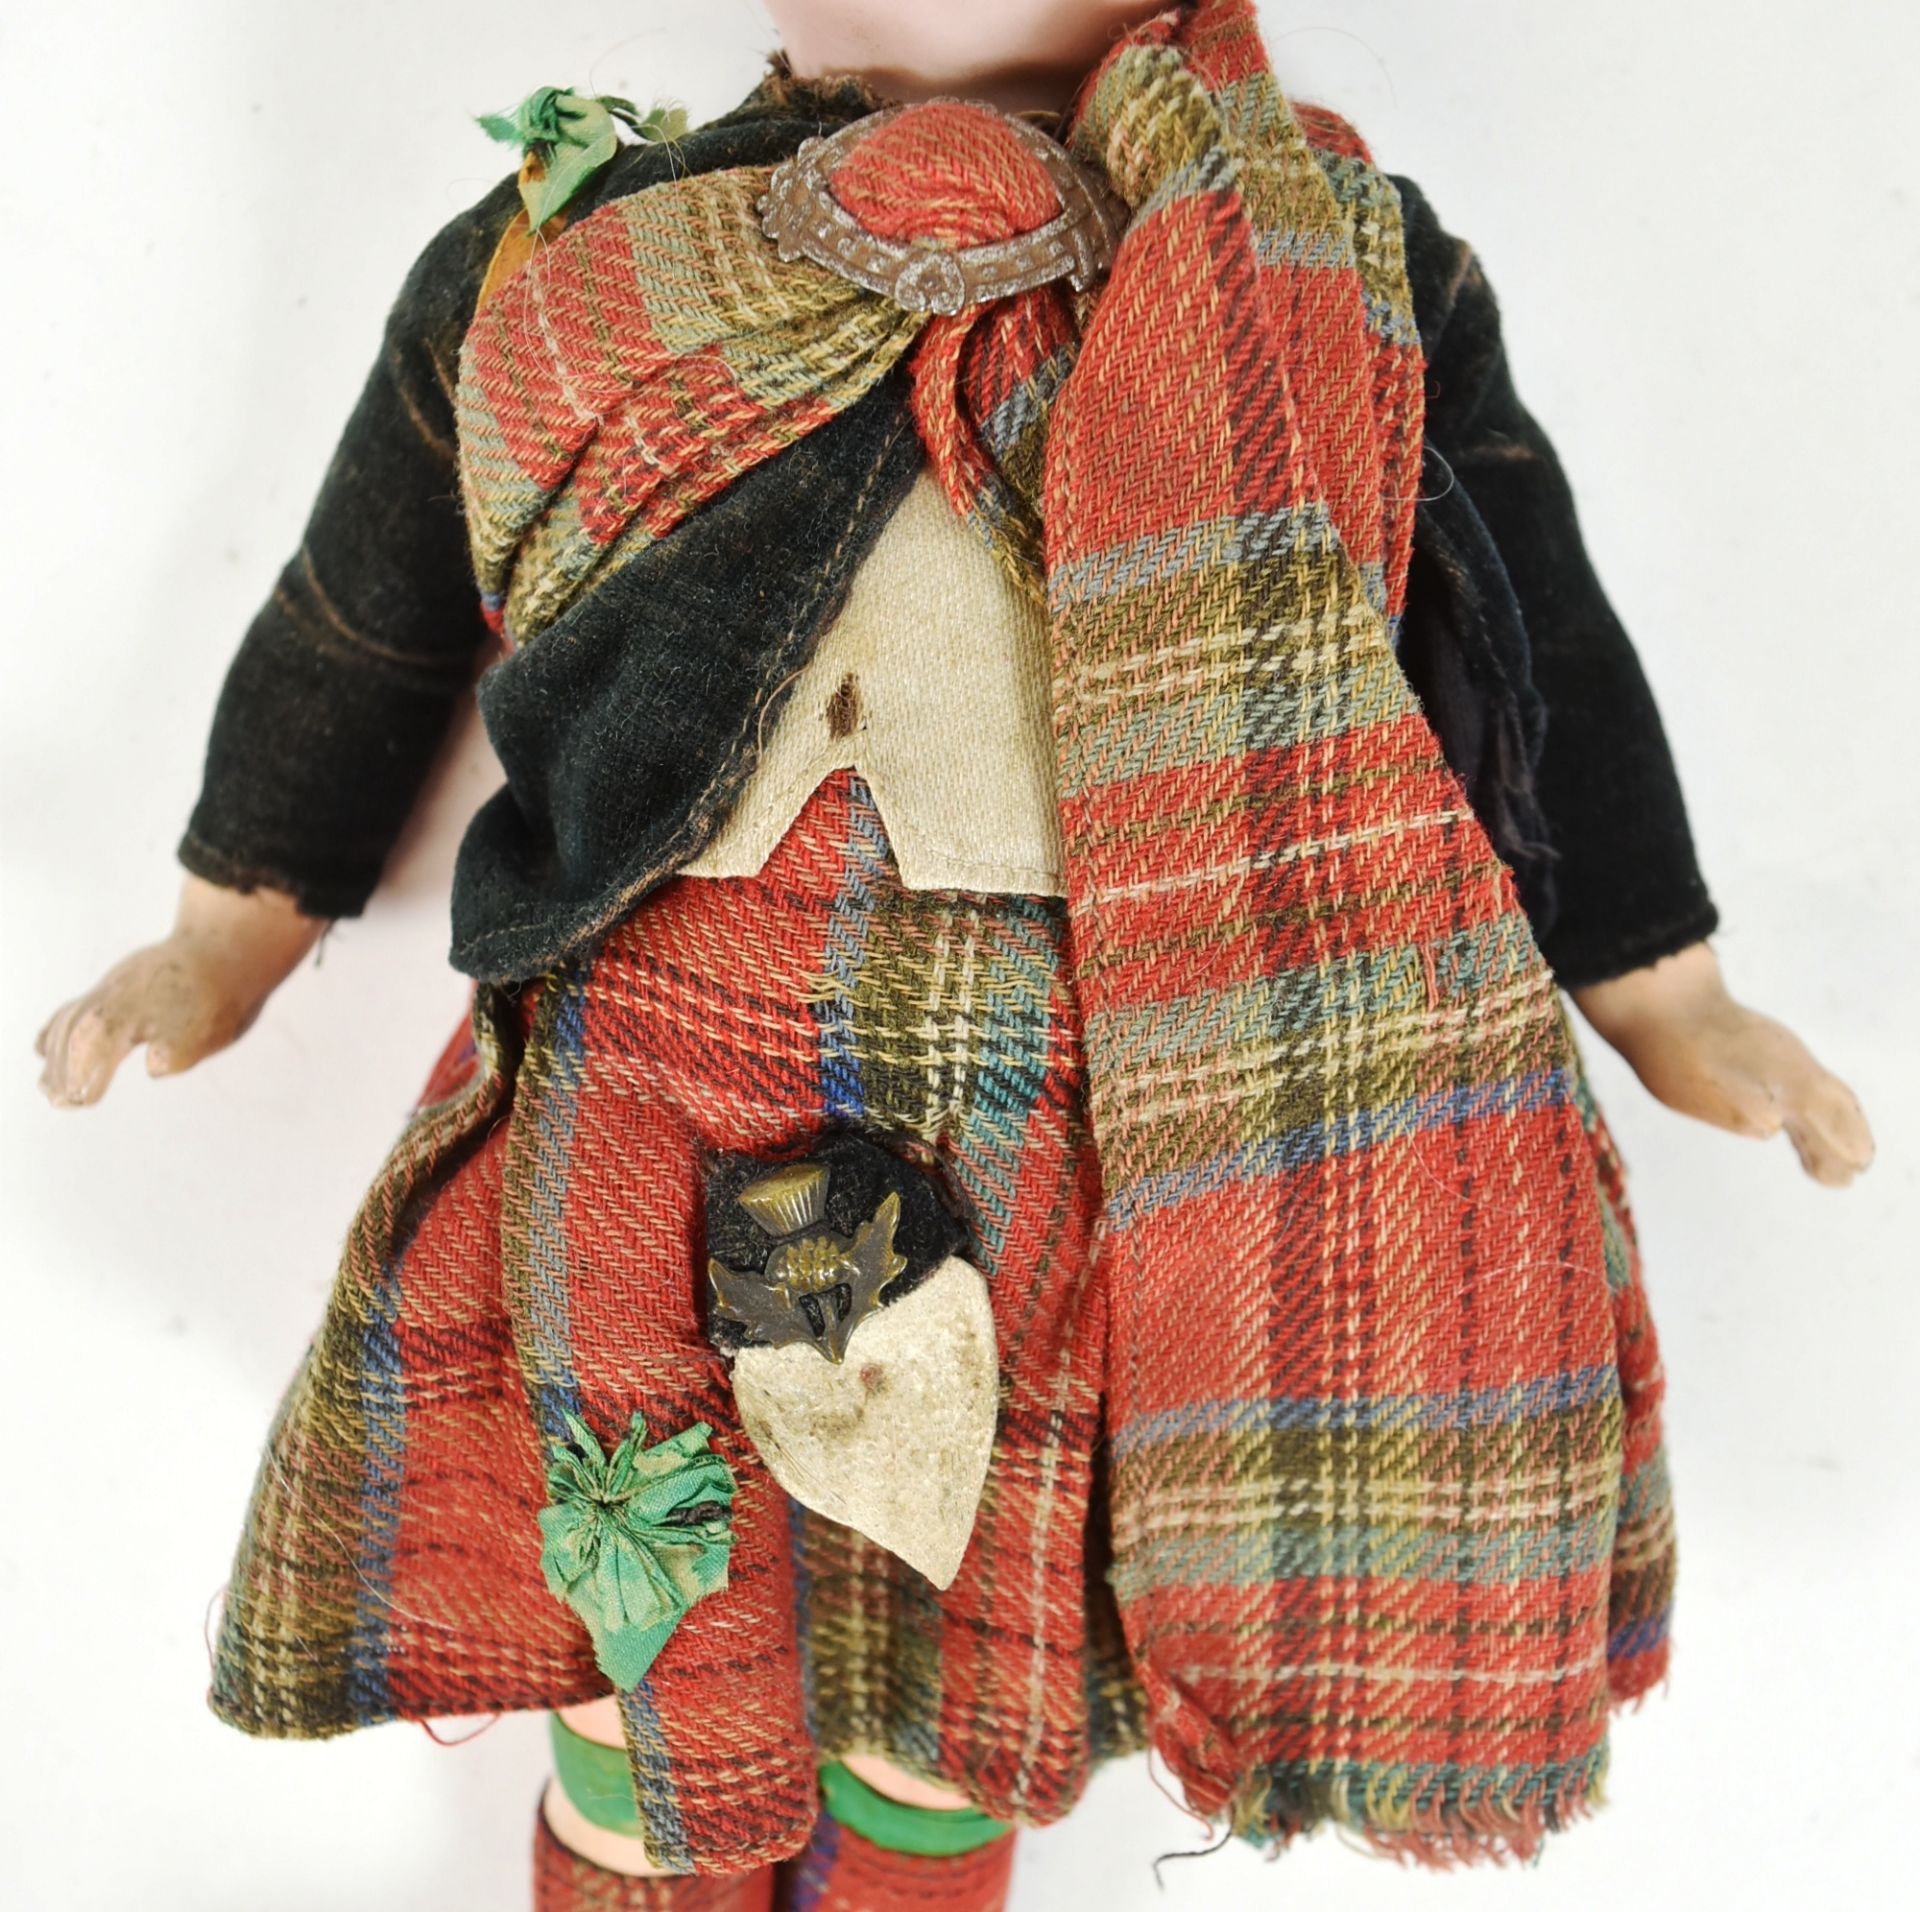 EARLY 20TH CENTURY GERMAN SIMON & HALBIG BISQUE HEADED DOLL - Image 3 of 6